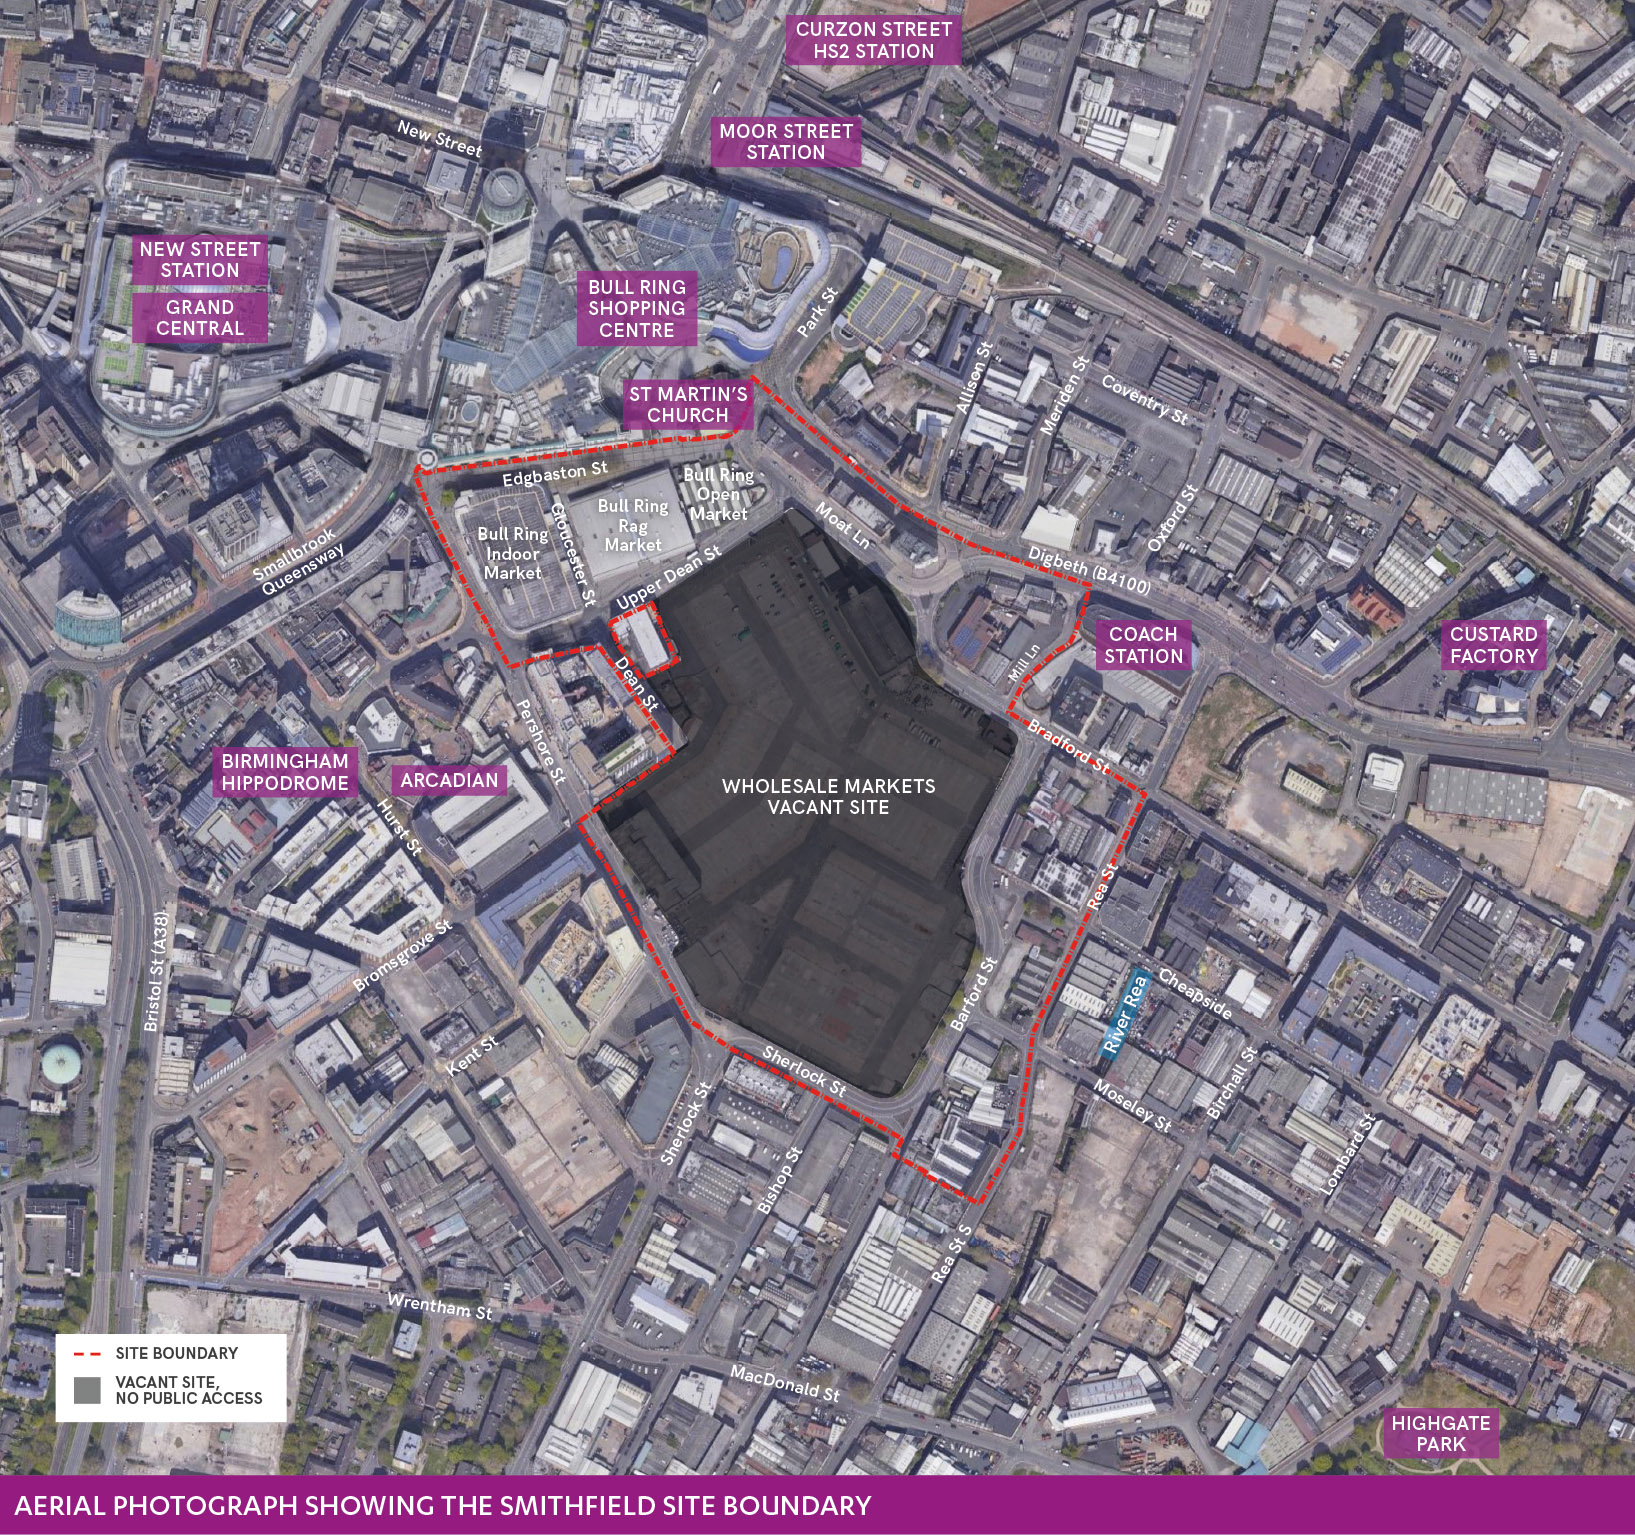 P2 Aerial photograph showing the Smithfield site boundary.jpg